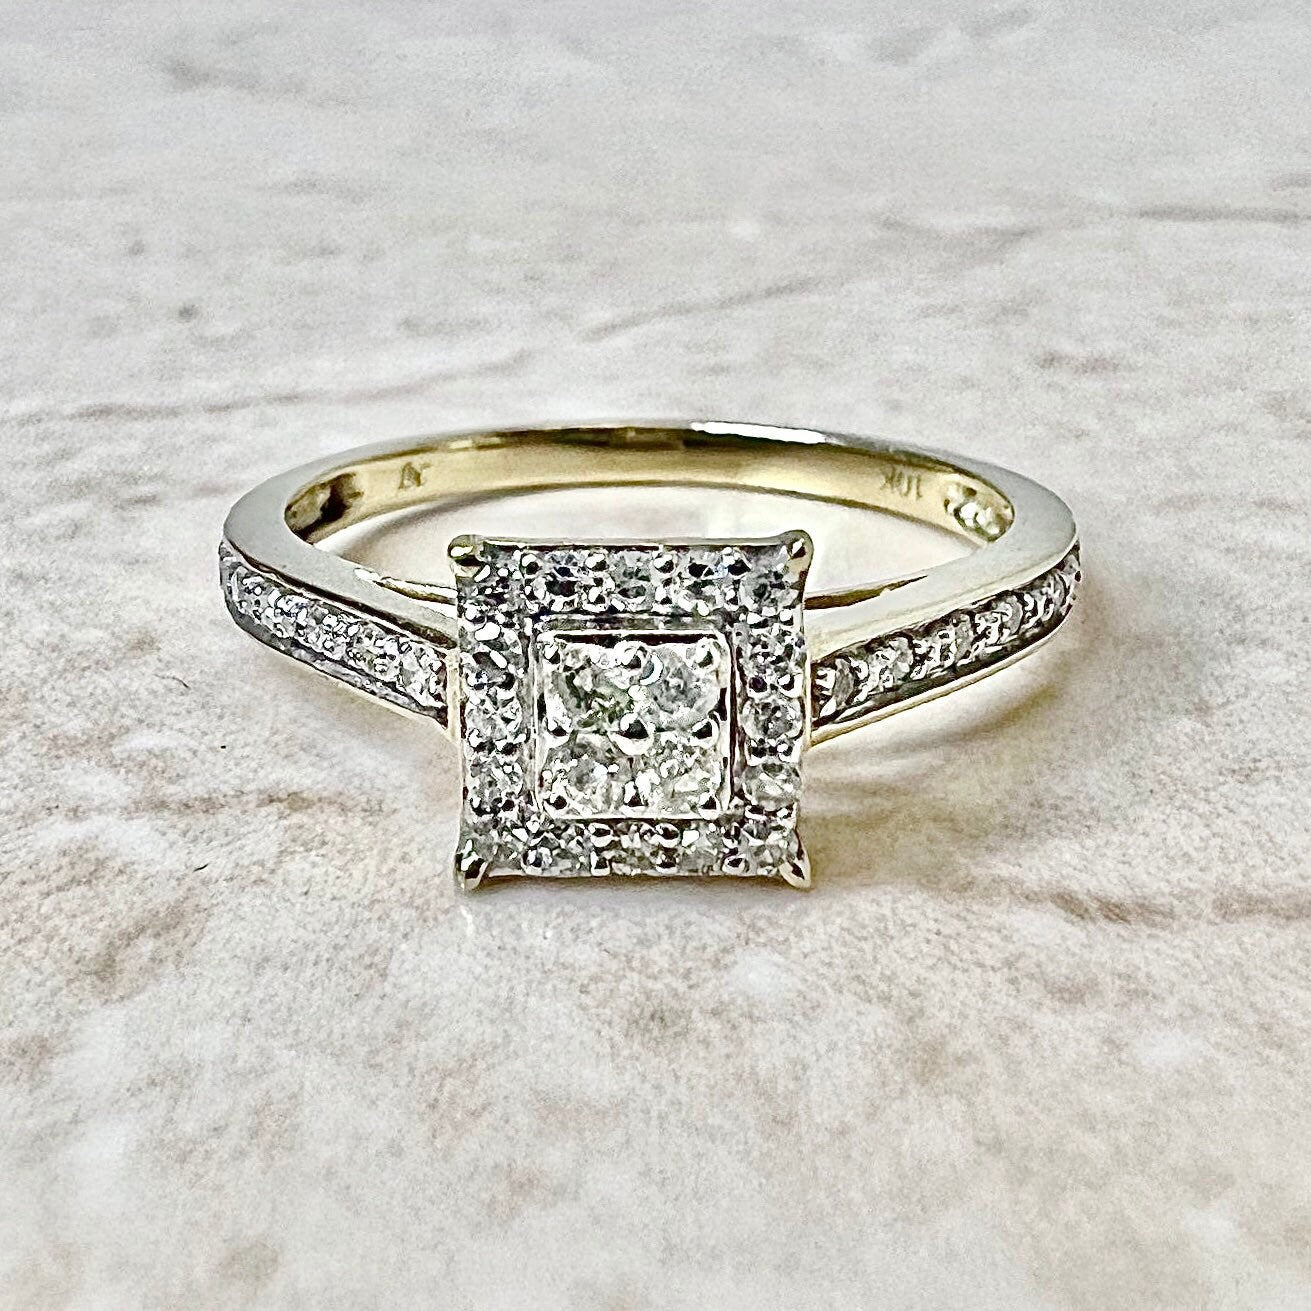 10K Pave Diamond Halo Ring - Yellow Gold Diamond Promise Ring - Wedding Ring - Engagement Ring - Diamond Cluster Ring - Best Gifts For Her